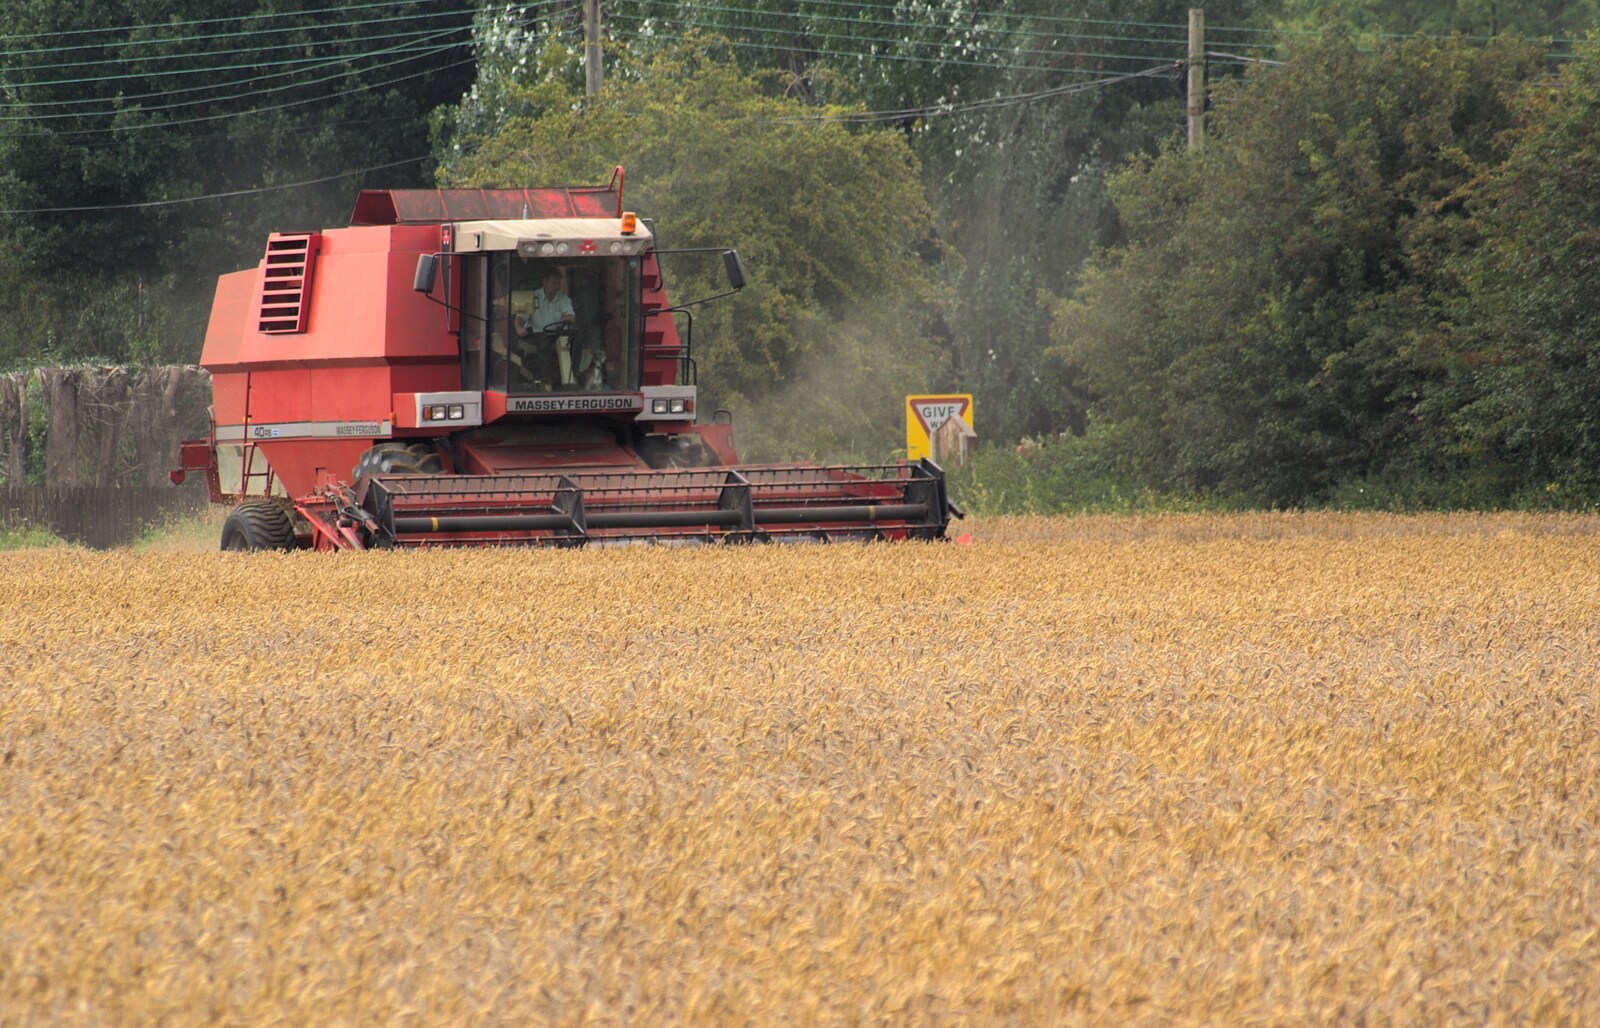 More combine action from Farmers' Market and Harvest Day, Diss and Brome, Norfolk and Suffolk - 10th September 2011